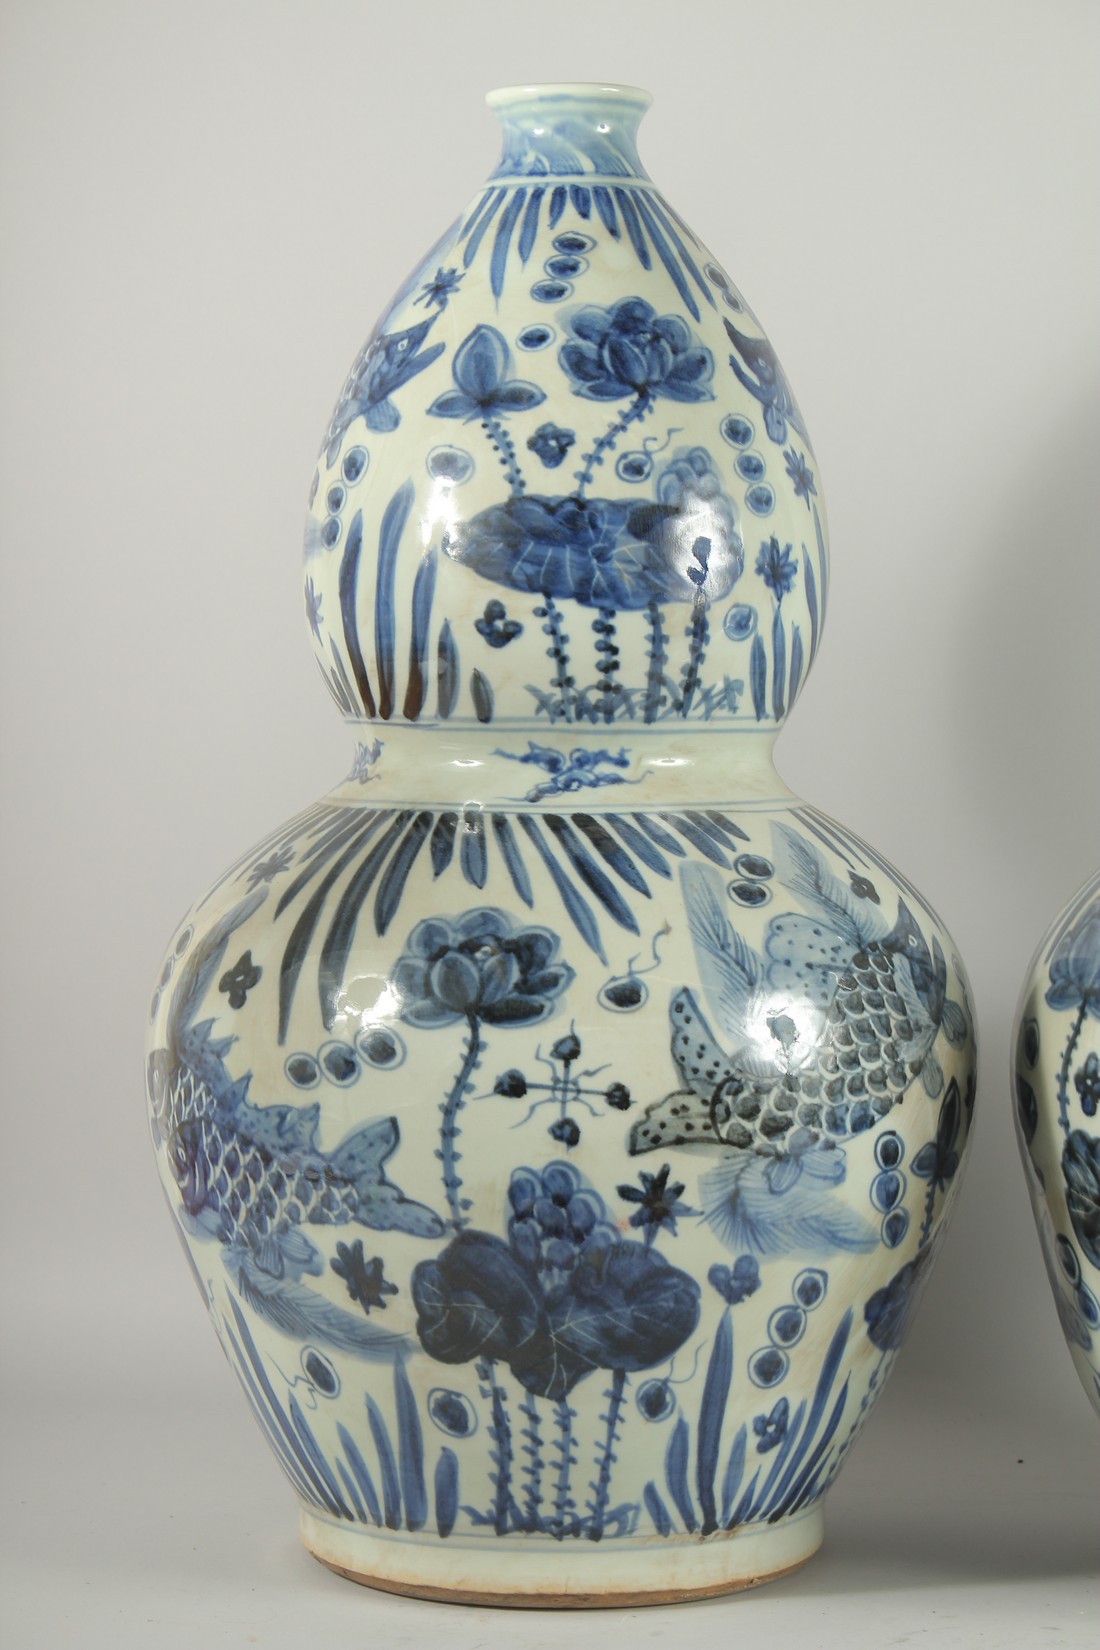 A GOOD PAIR OF CHINESE BLUE AND WHITE PORCELAIN GOURD VASES. 24ins high. - Image 2 of 3